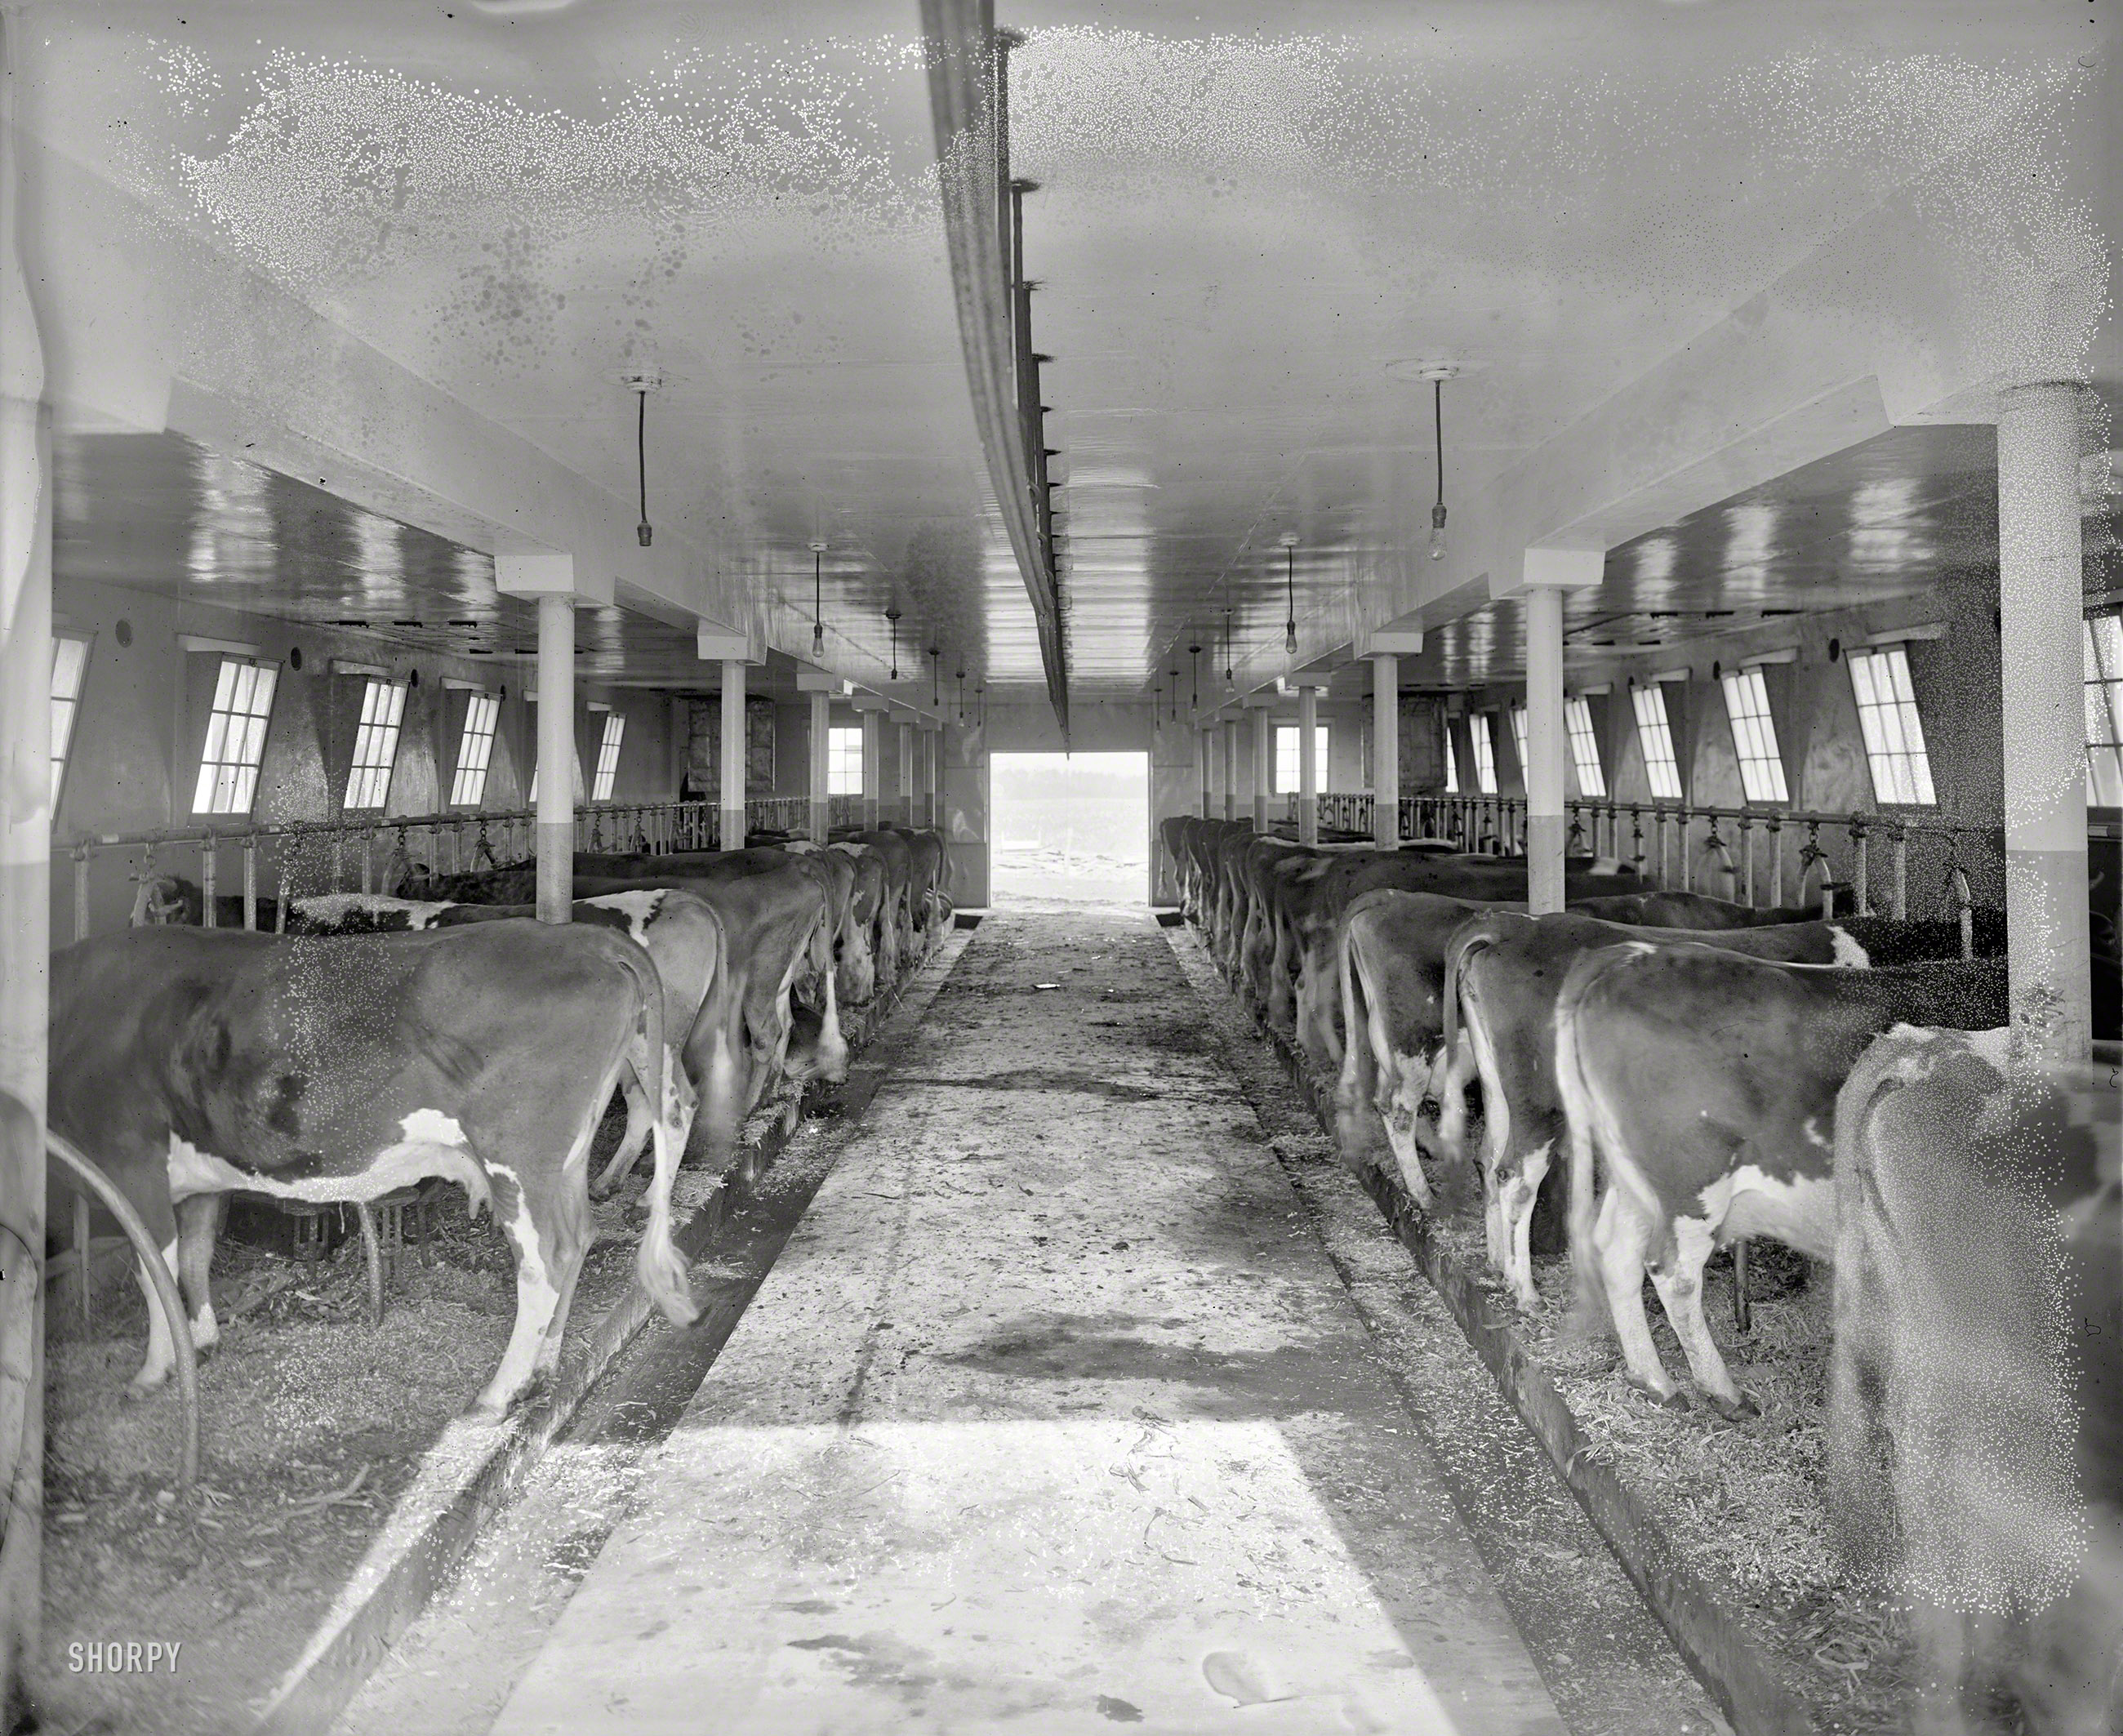 Washington, D.C., circa 1925. "Chestnut Farms Dairy." The business end of milk production. National Photo Co. glass negative. View full size.